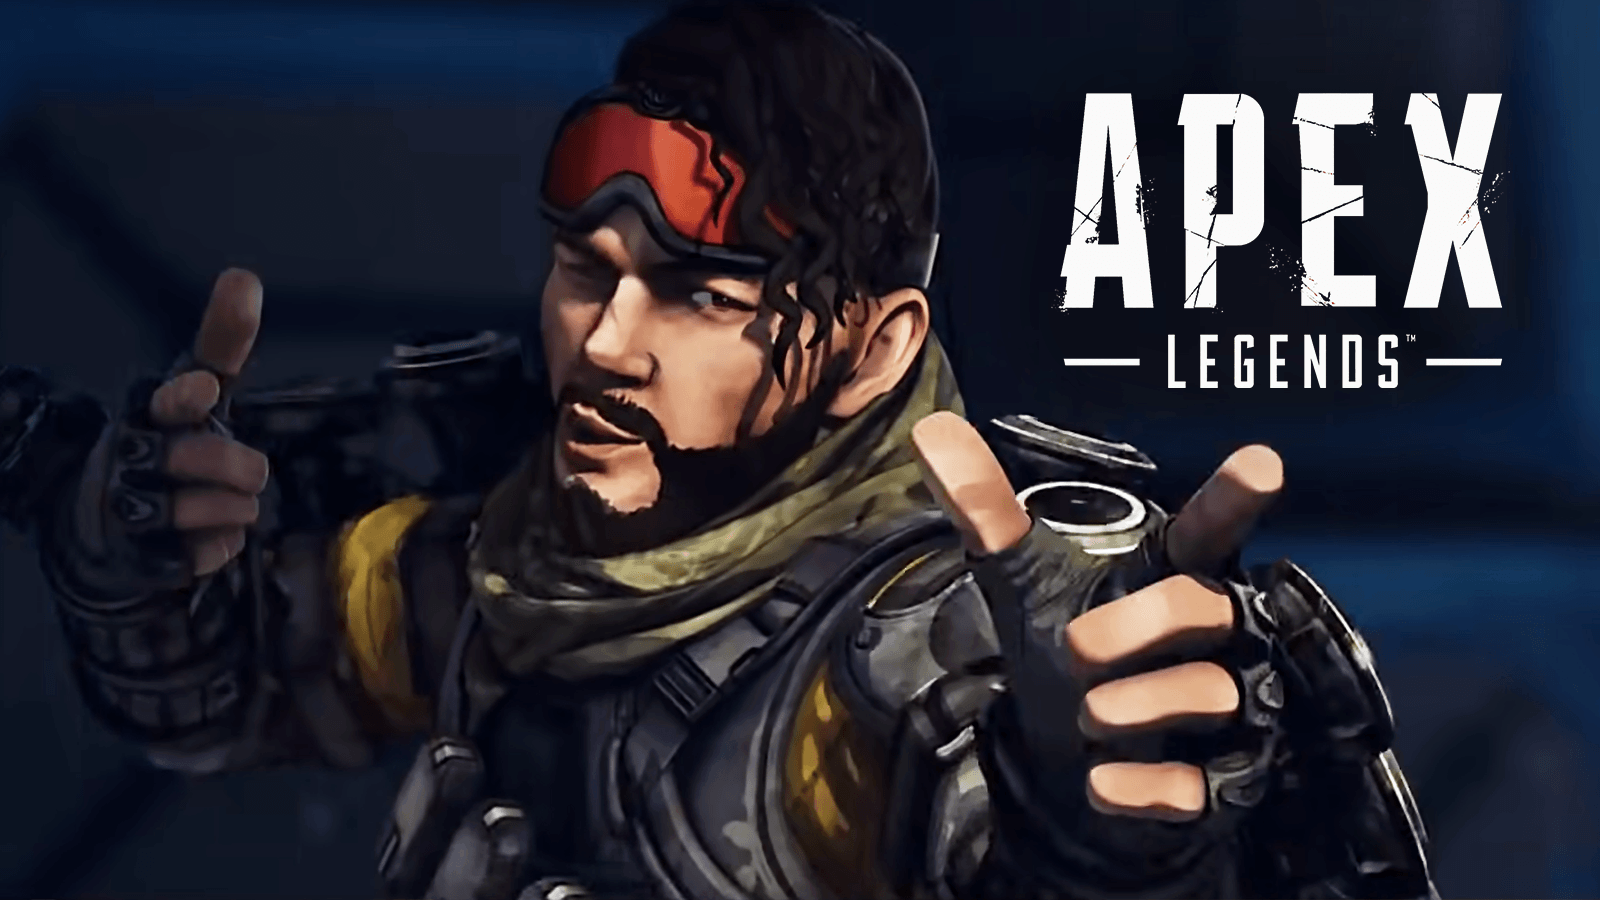 Featured image of post Apex Legends Mirage Wallpaper 4k wallpaper mirage apex legends season 3 uhd ultra hd for desktop pc laptop iphone android phone smartphone imac macbook tablet mobile device